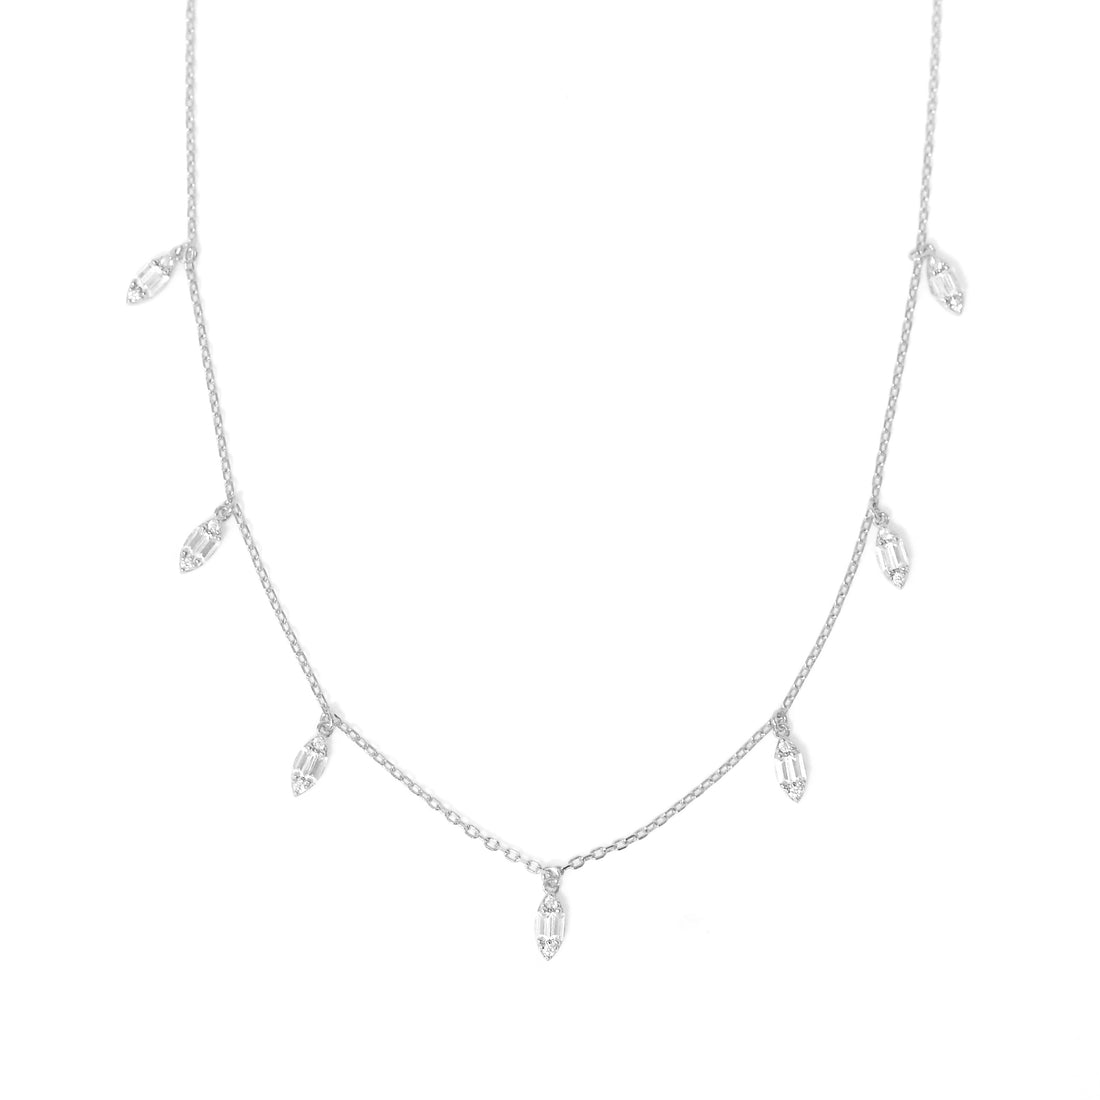 Premium Silver Necklace with Charm Pendant and Sparkling Zircons - DOLCE MONDO